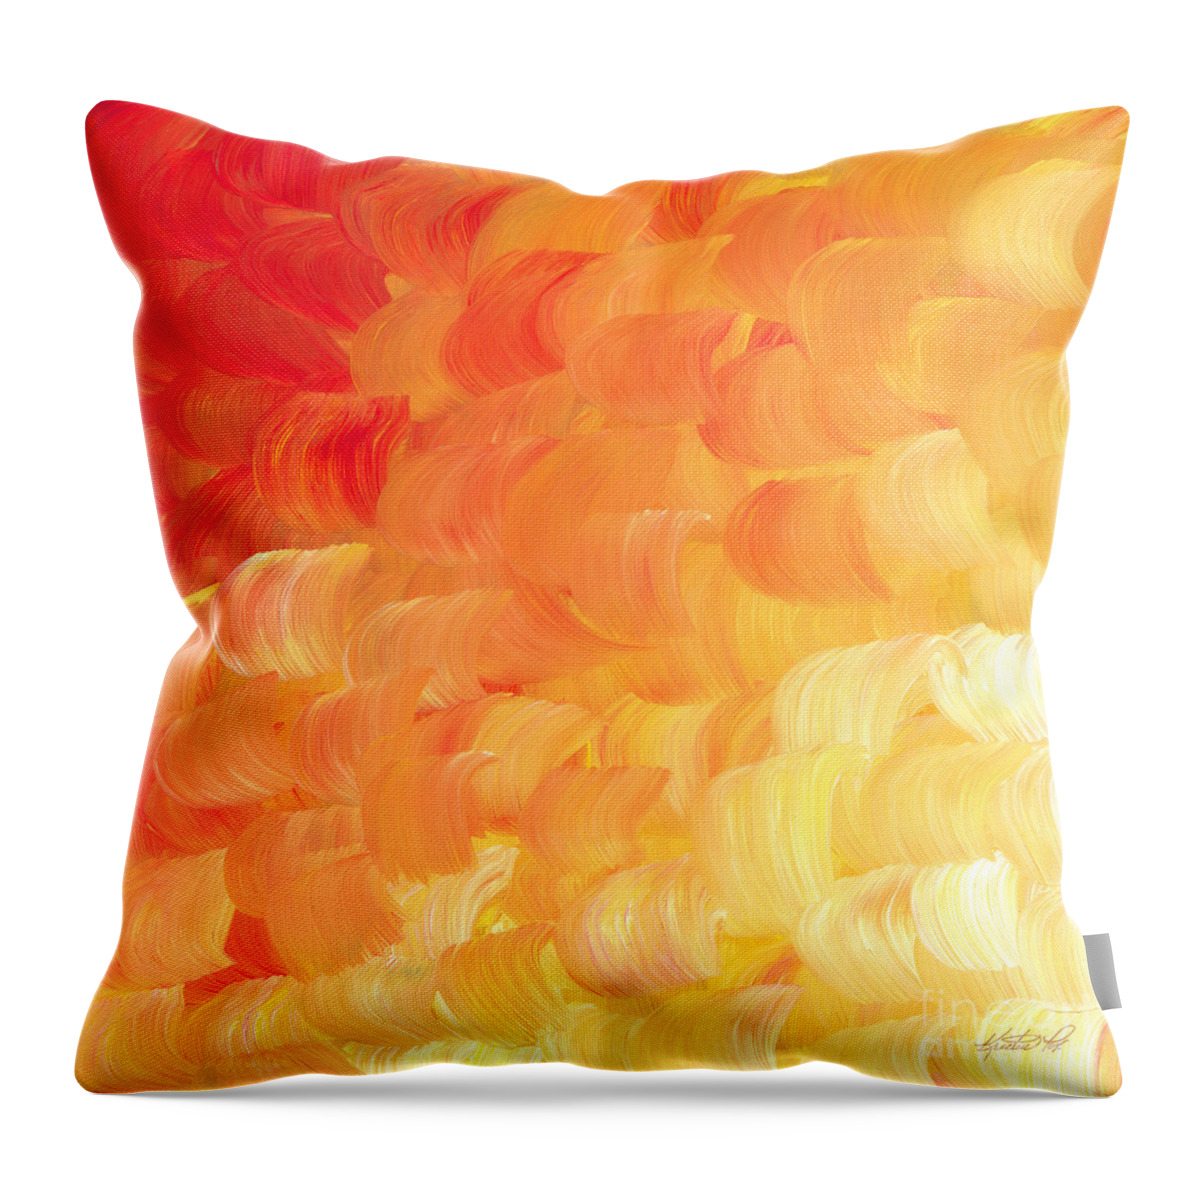 Artoffoxvox Throw Pillow featuring the painting Leaps of Faith Painting by Kristen Fox